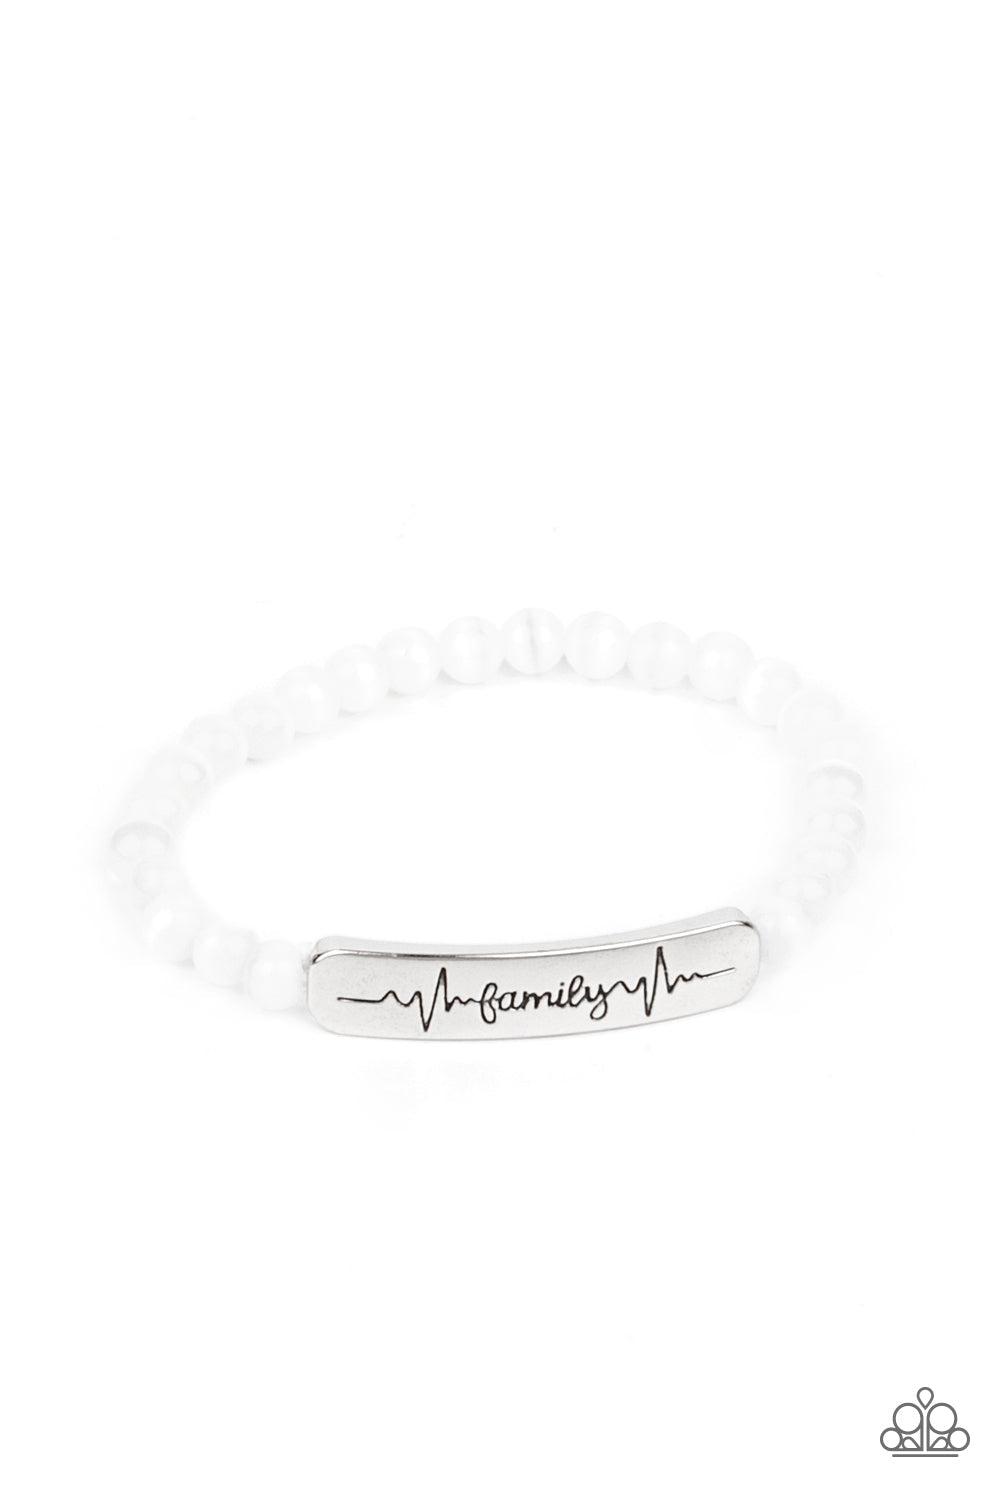 Family is Forever White Inspirational Bracelet - Paparazzi Accessories- lightbox - CarasShop.com - $5 Jewelry by Cara Jewels